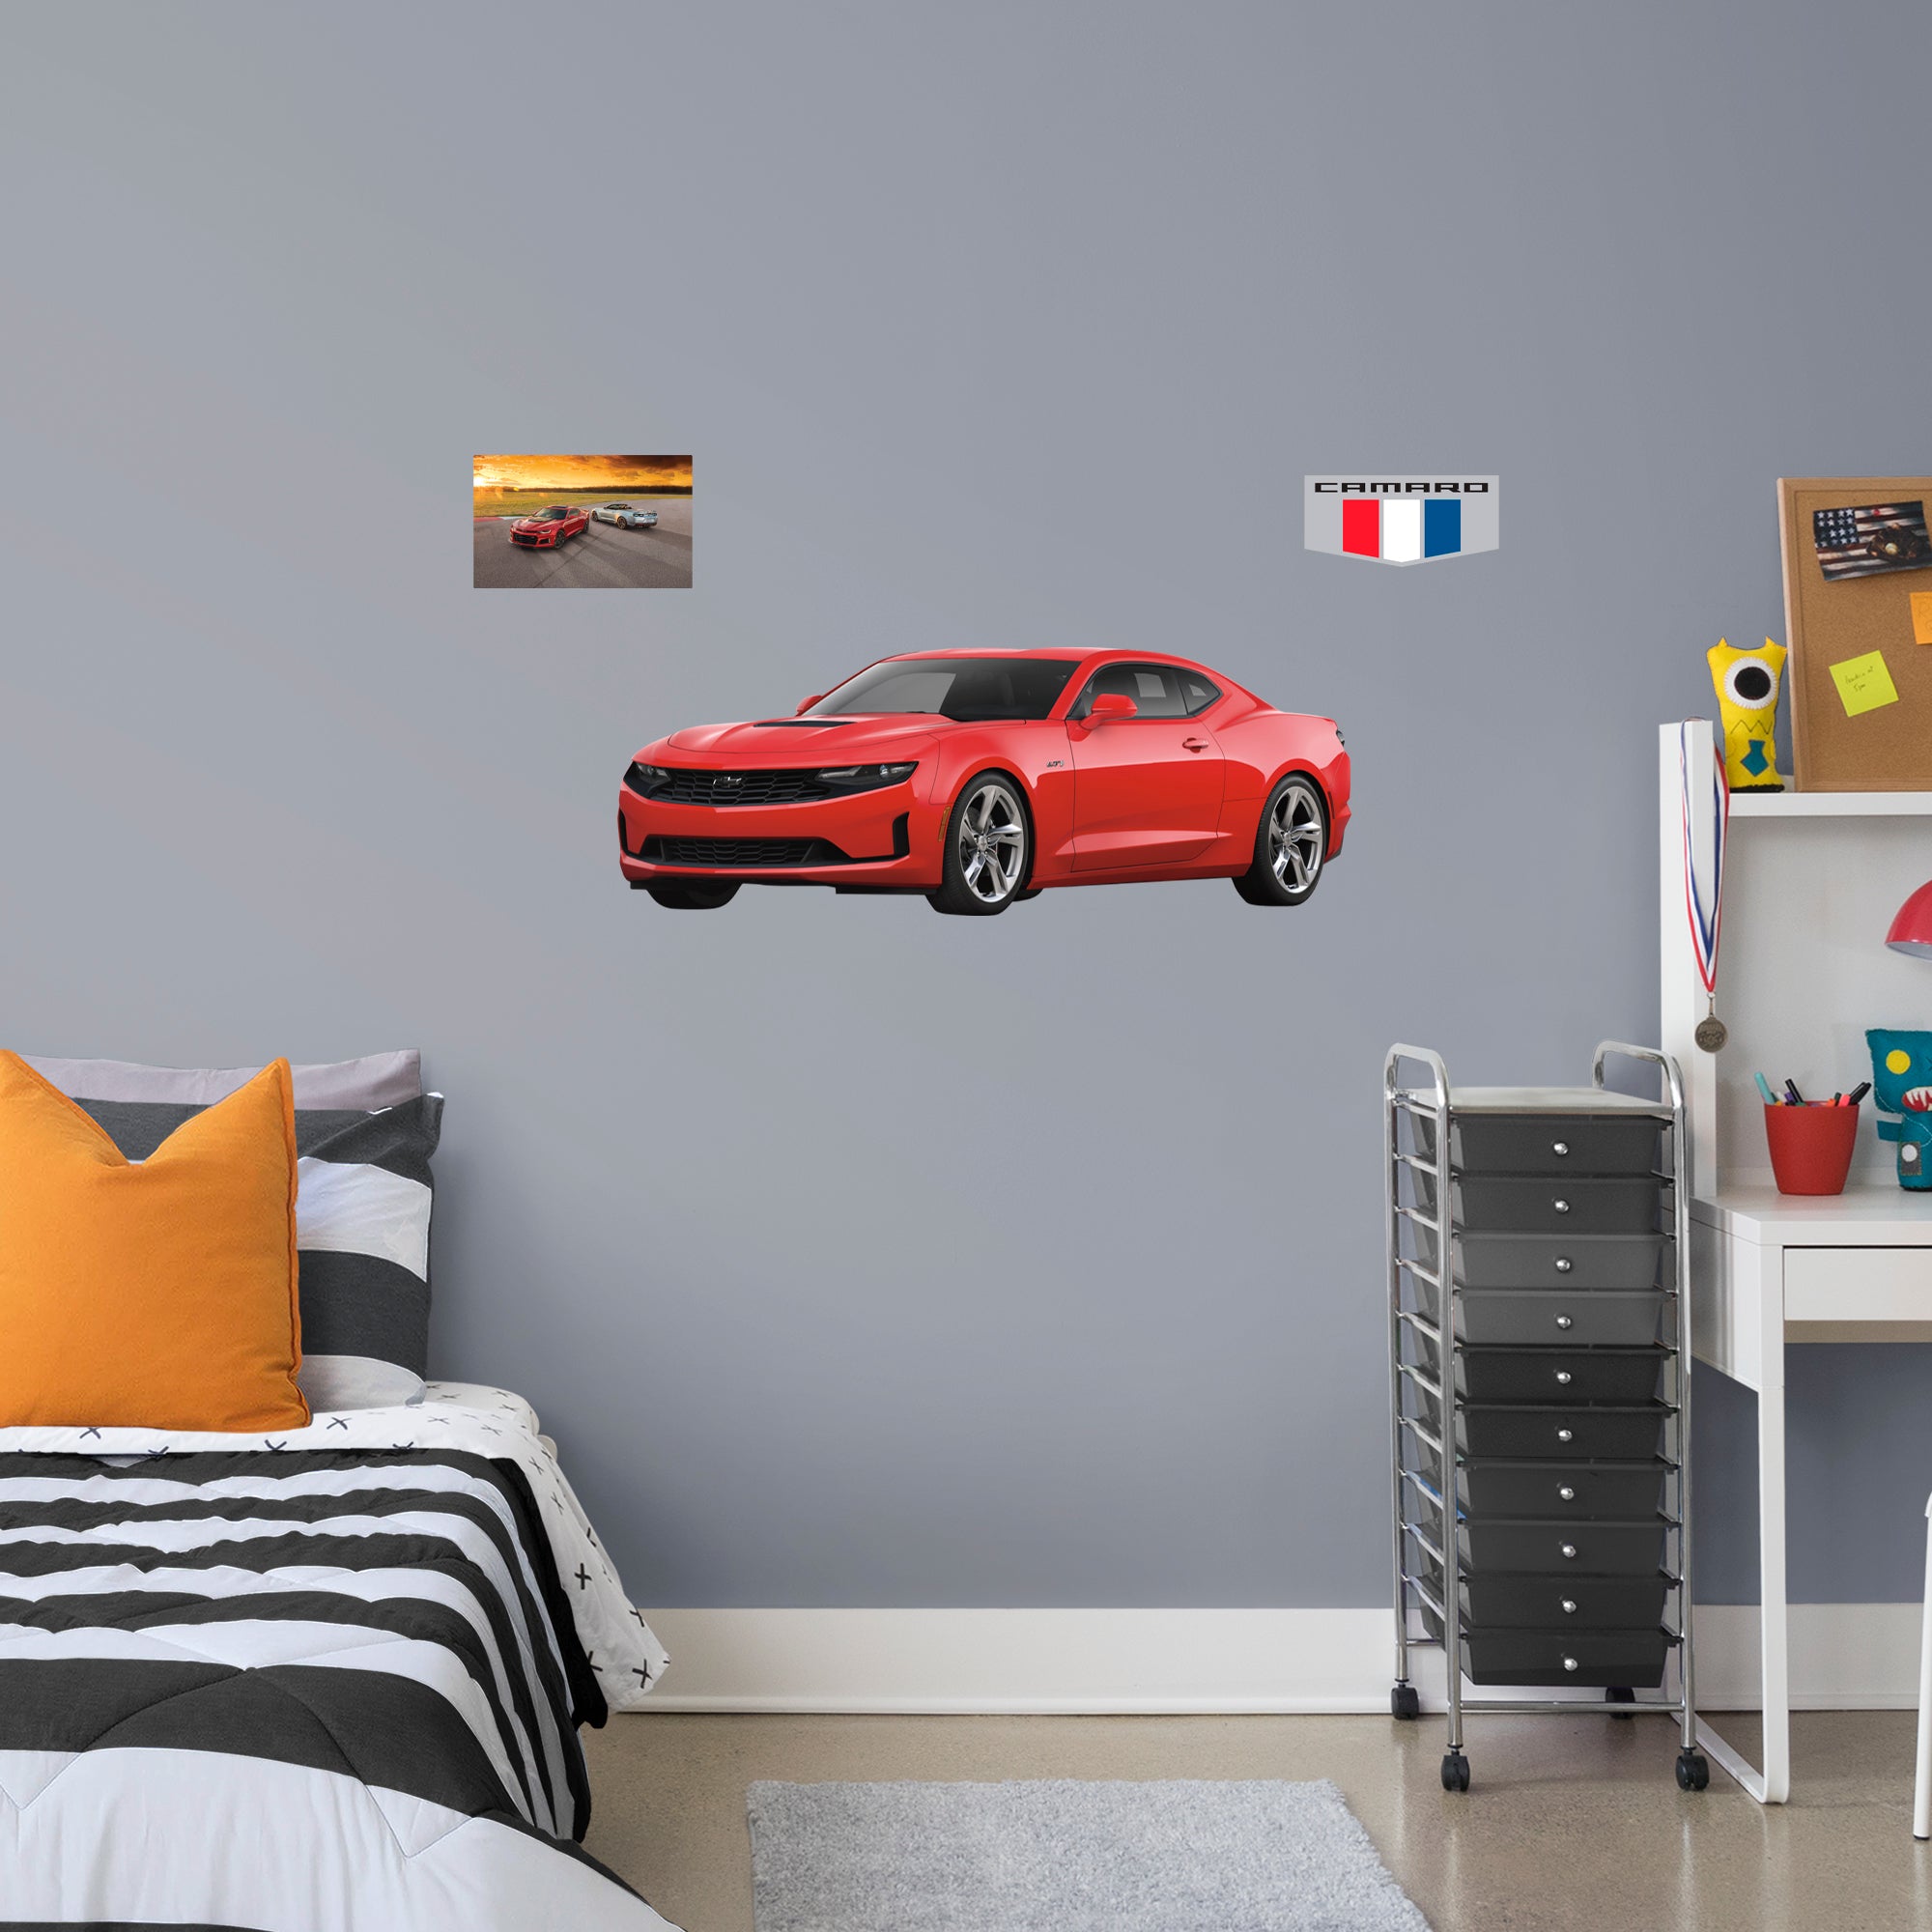 Chevrolet Red Camaro: Officially Licensed GM Removable Wall Decal Giant + 2 Decals by Fathead | Vinyl